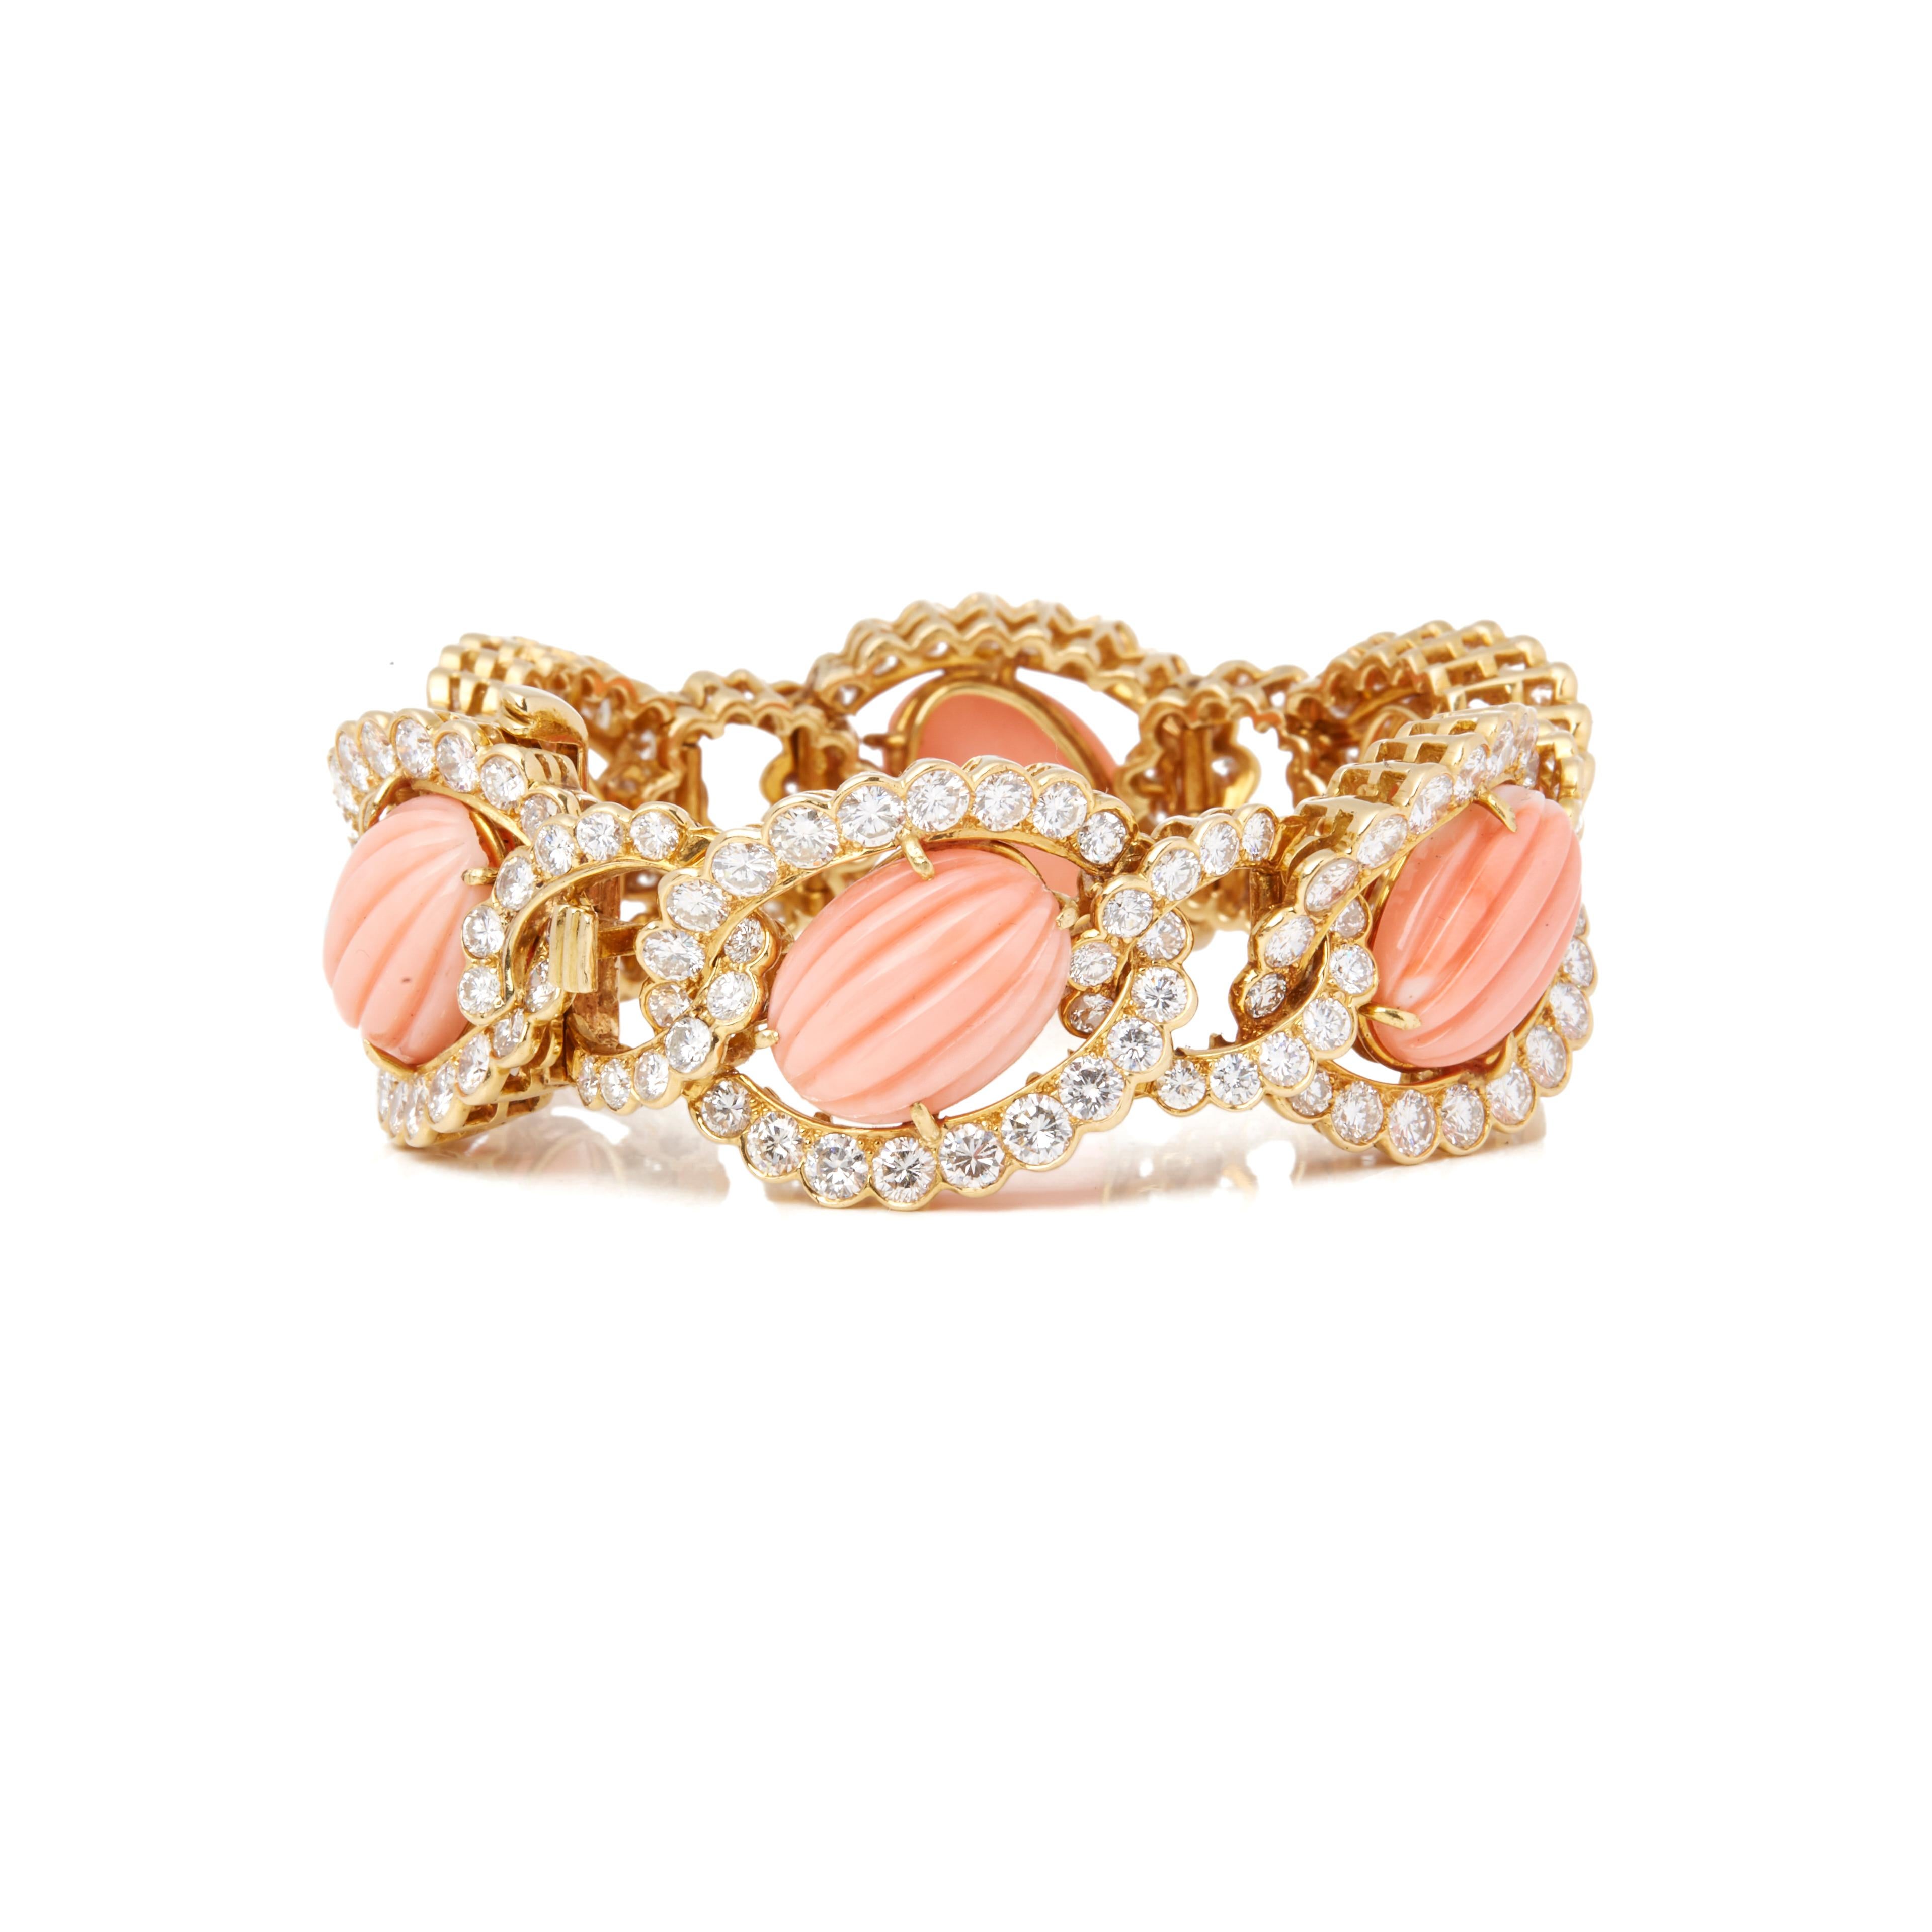 This Vintage Bracelet by Van Cleef and Arpels features One Hundred and Ninety Two Round Brilliant Cut Diamonds in Claw Setting with Scalloped Edge in an interlocking open setting surrounding Six Oval Cabochon Faceted Pink Corals in a Four Claw